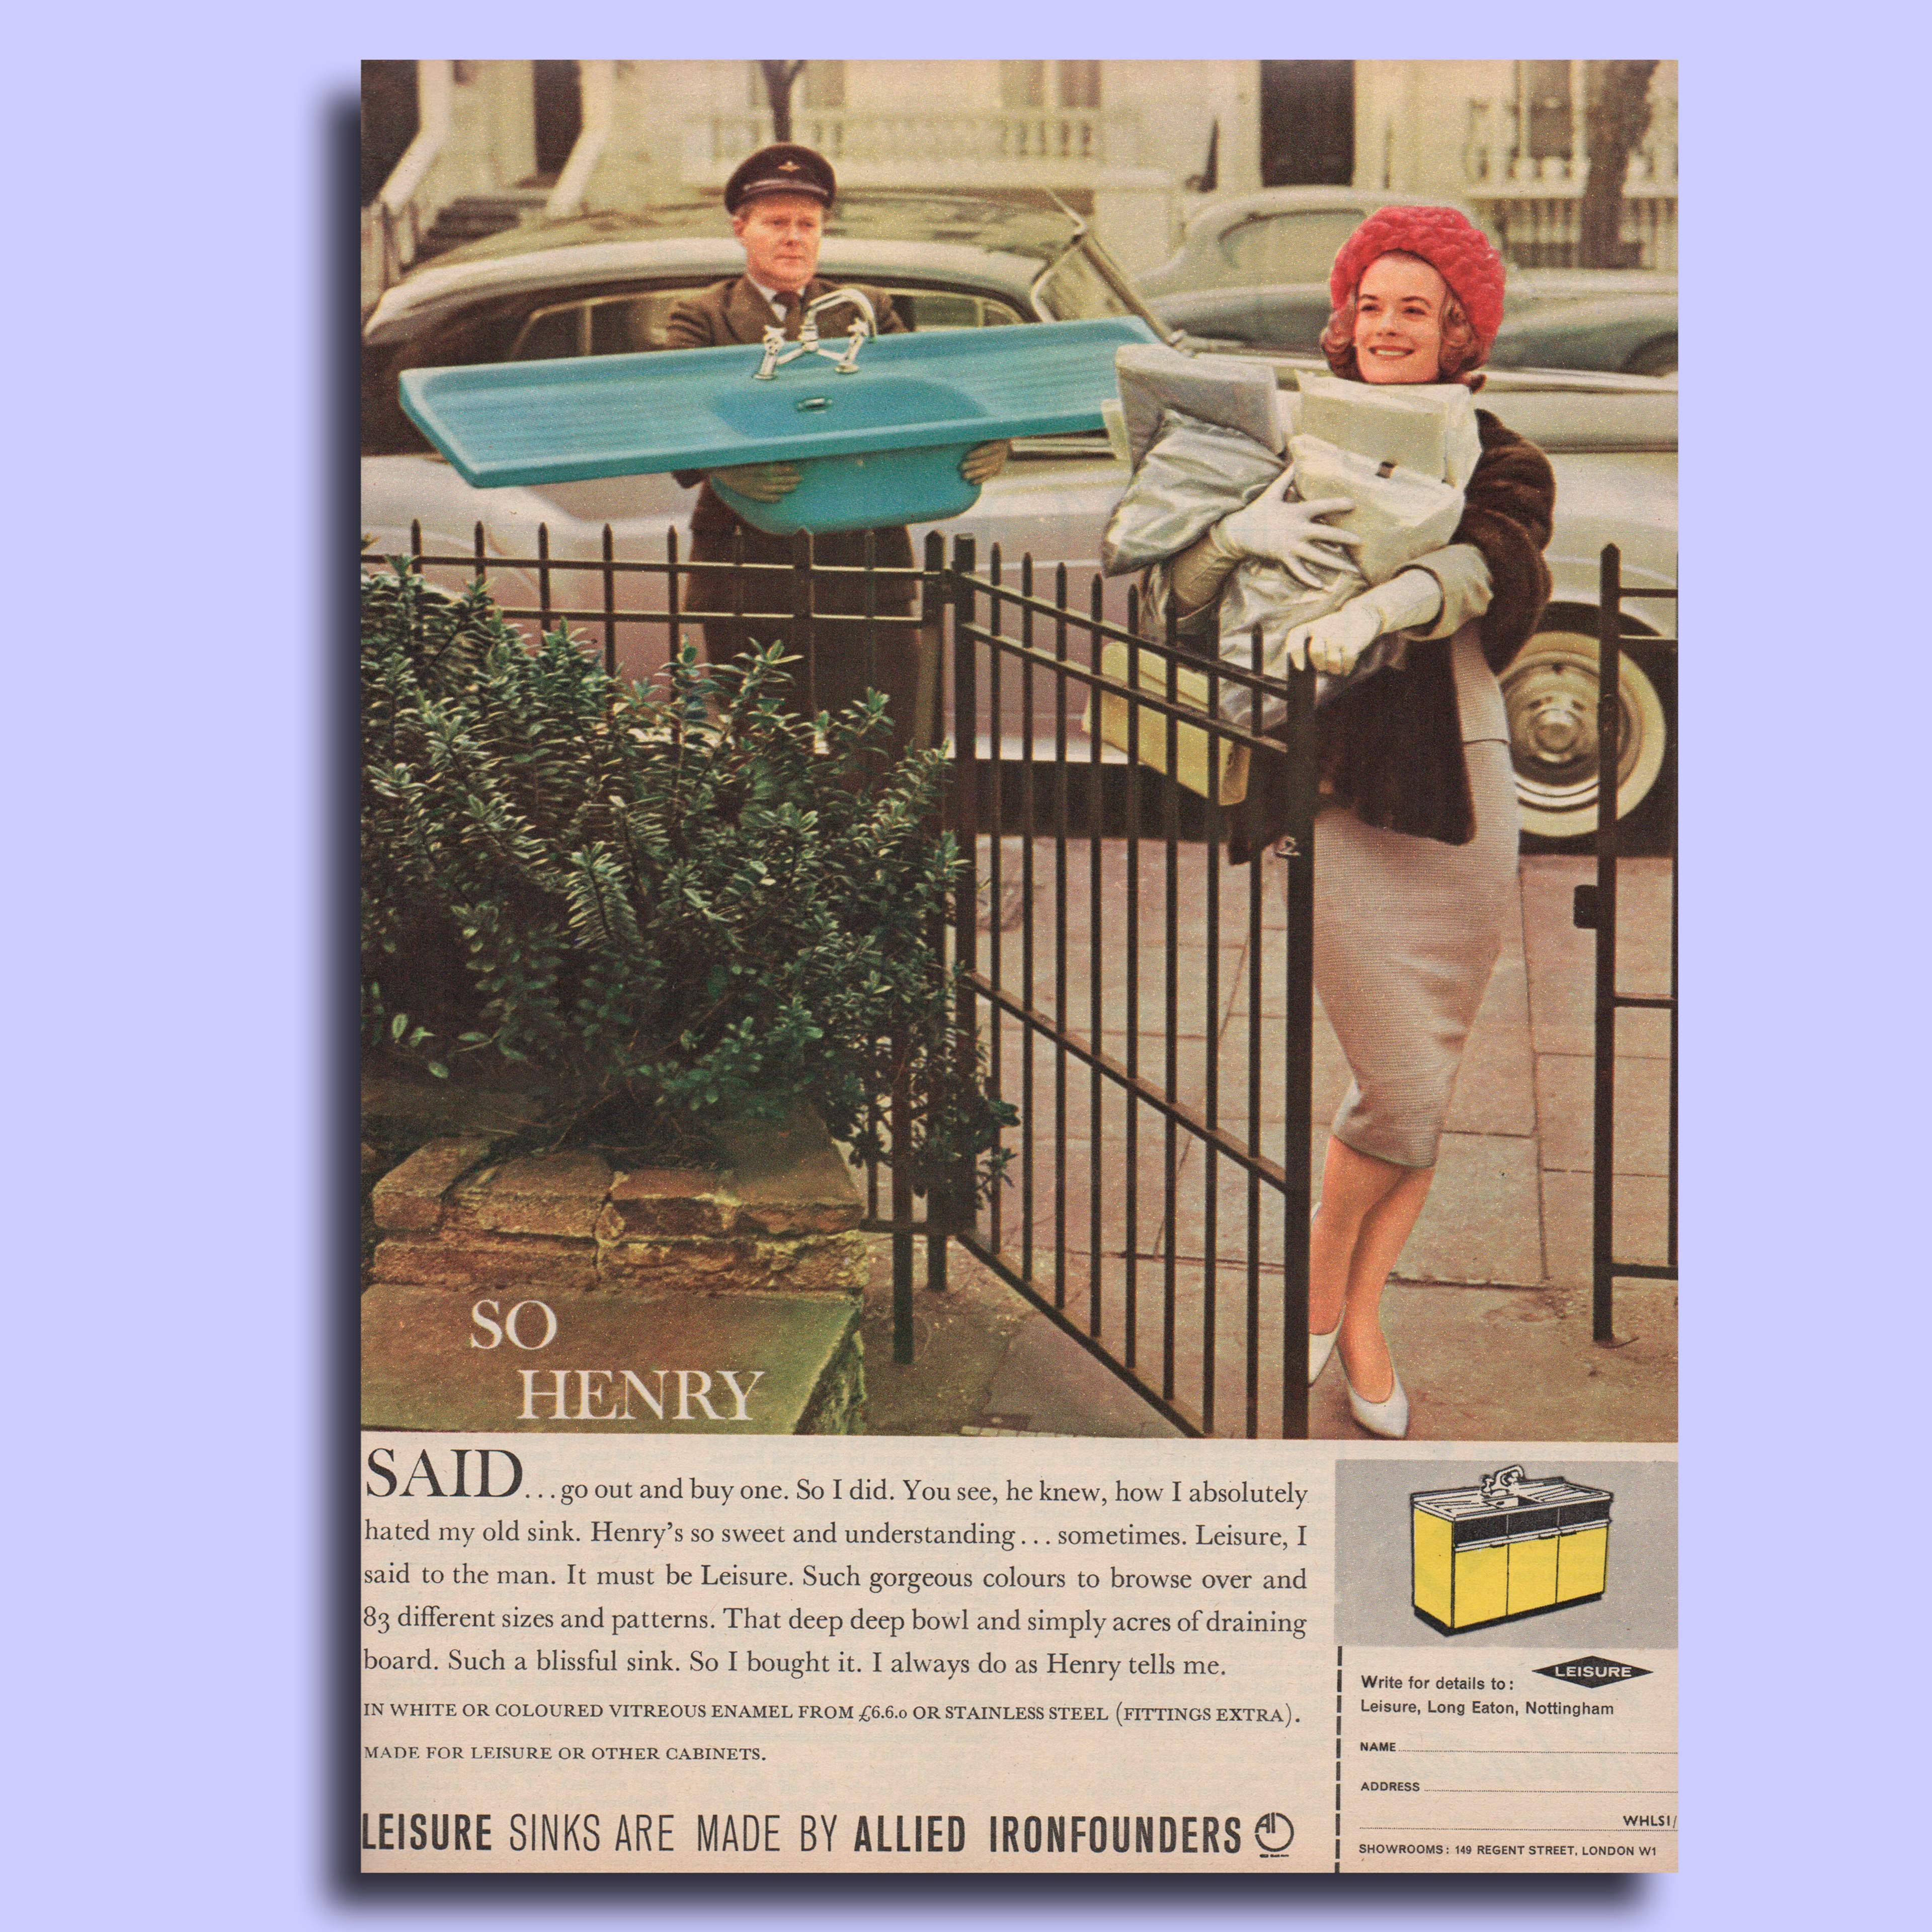 1962 advert for a kitchen sink. Colour photograph of a woman with her chauffeur holding a kitchen sink.